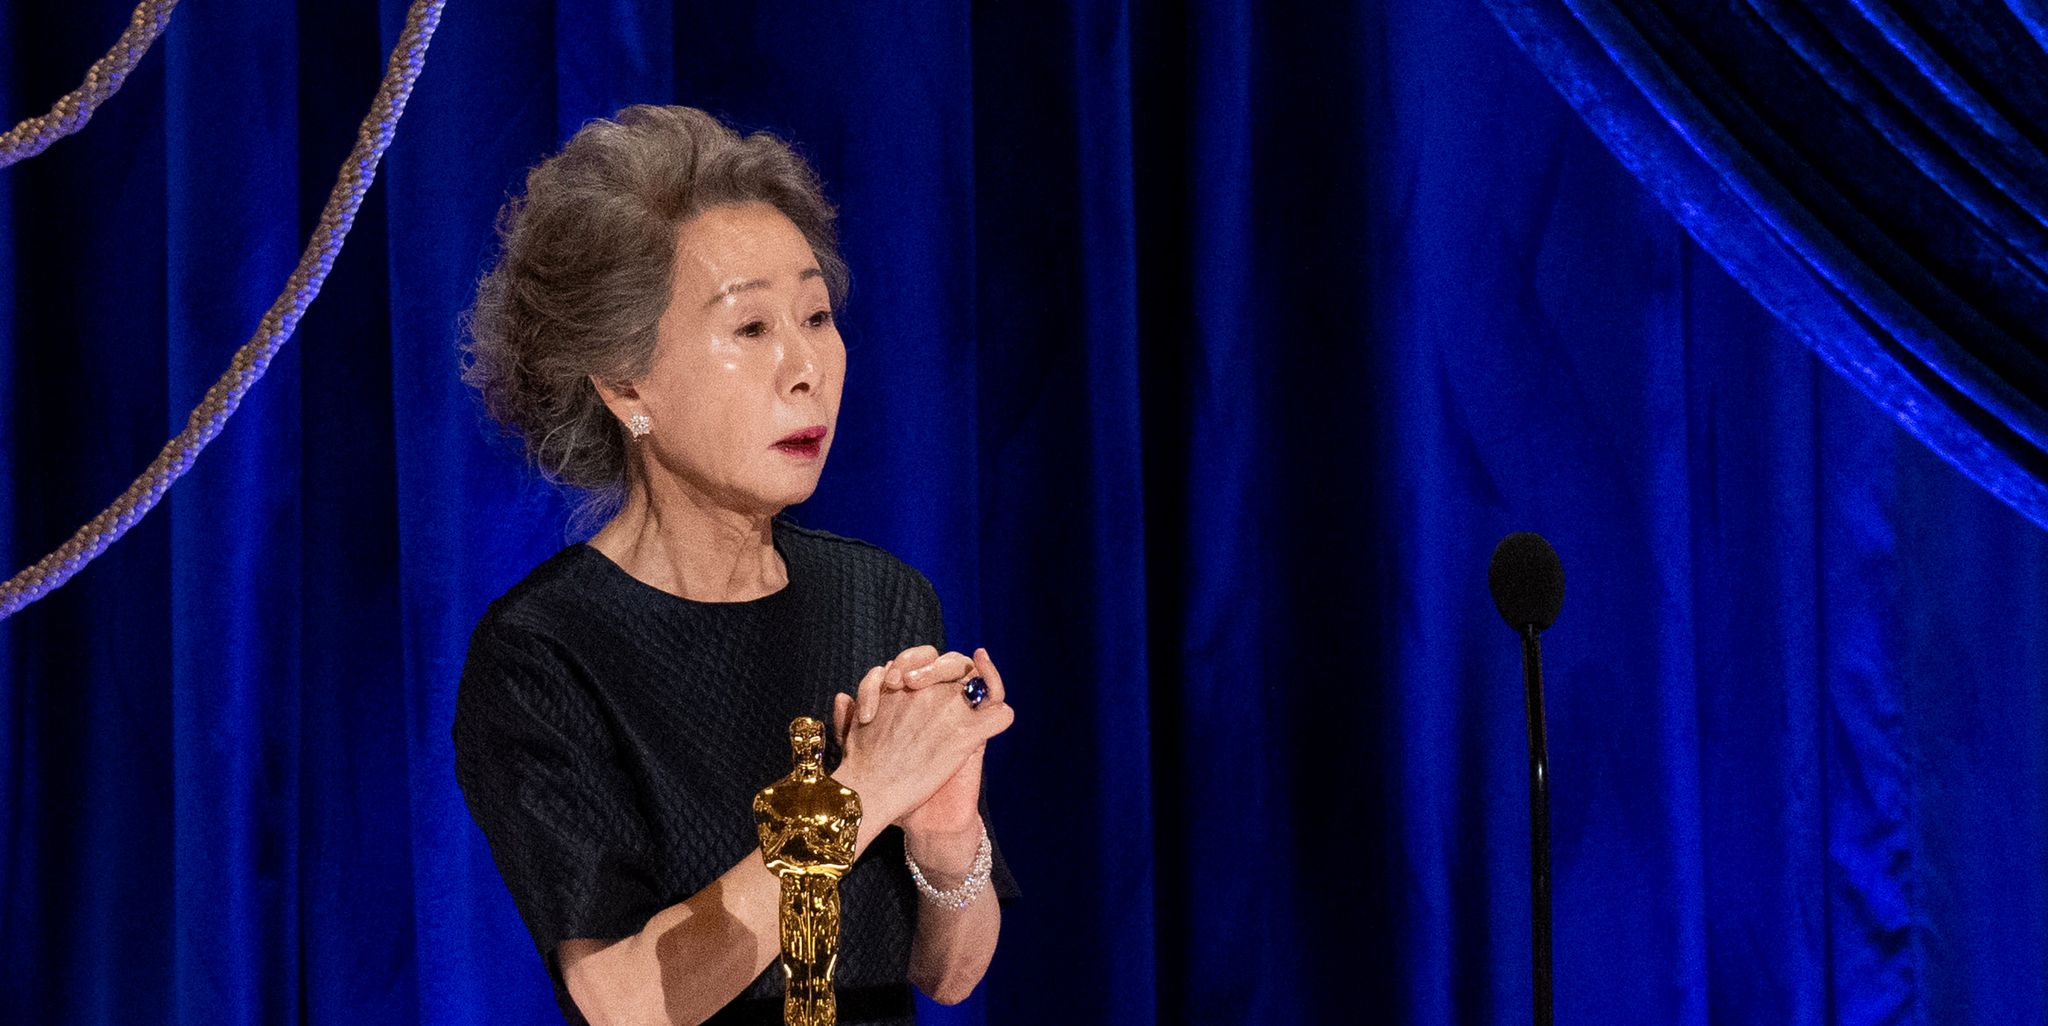 los angeles, california – april 25 editorial use only in this handout photo provided by ampas, yuh jung youn accepts the oscar for best actress in a supporting role for minari onstage during the 93rd annual academy awards at union station on april 25, 2021 in los angeles, california photo by todd wawrychukampas via getty images